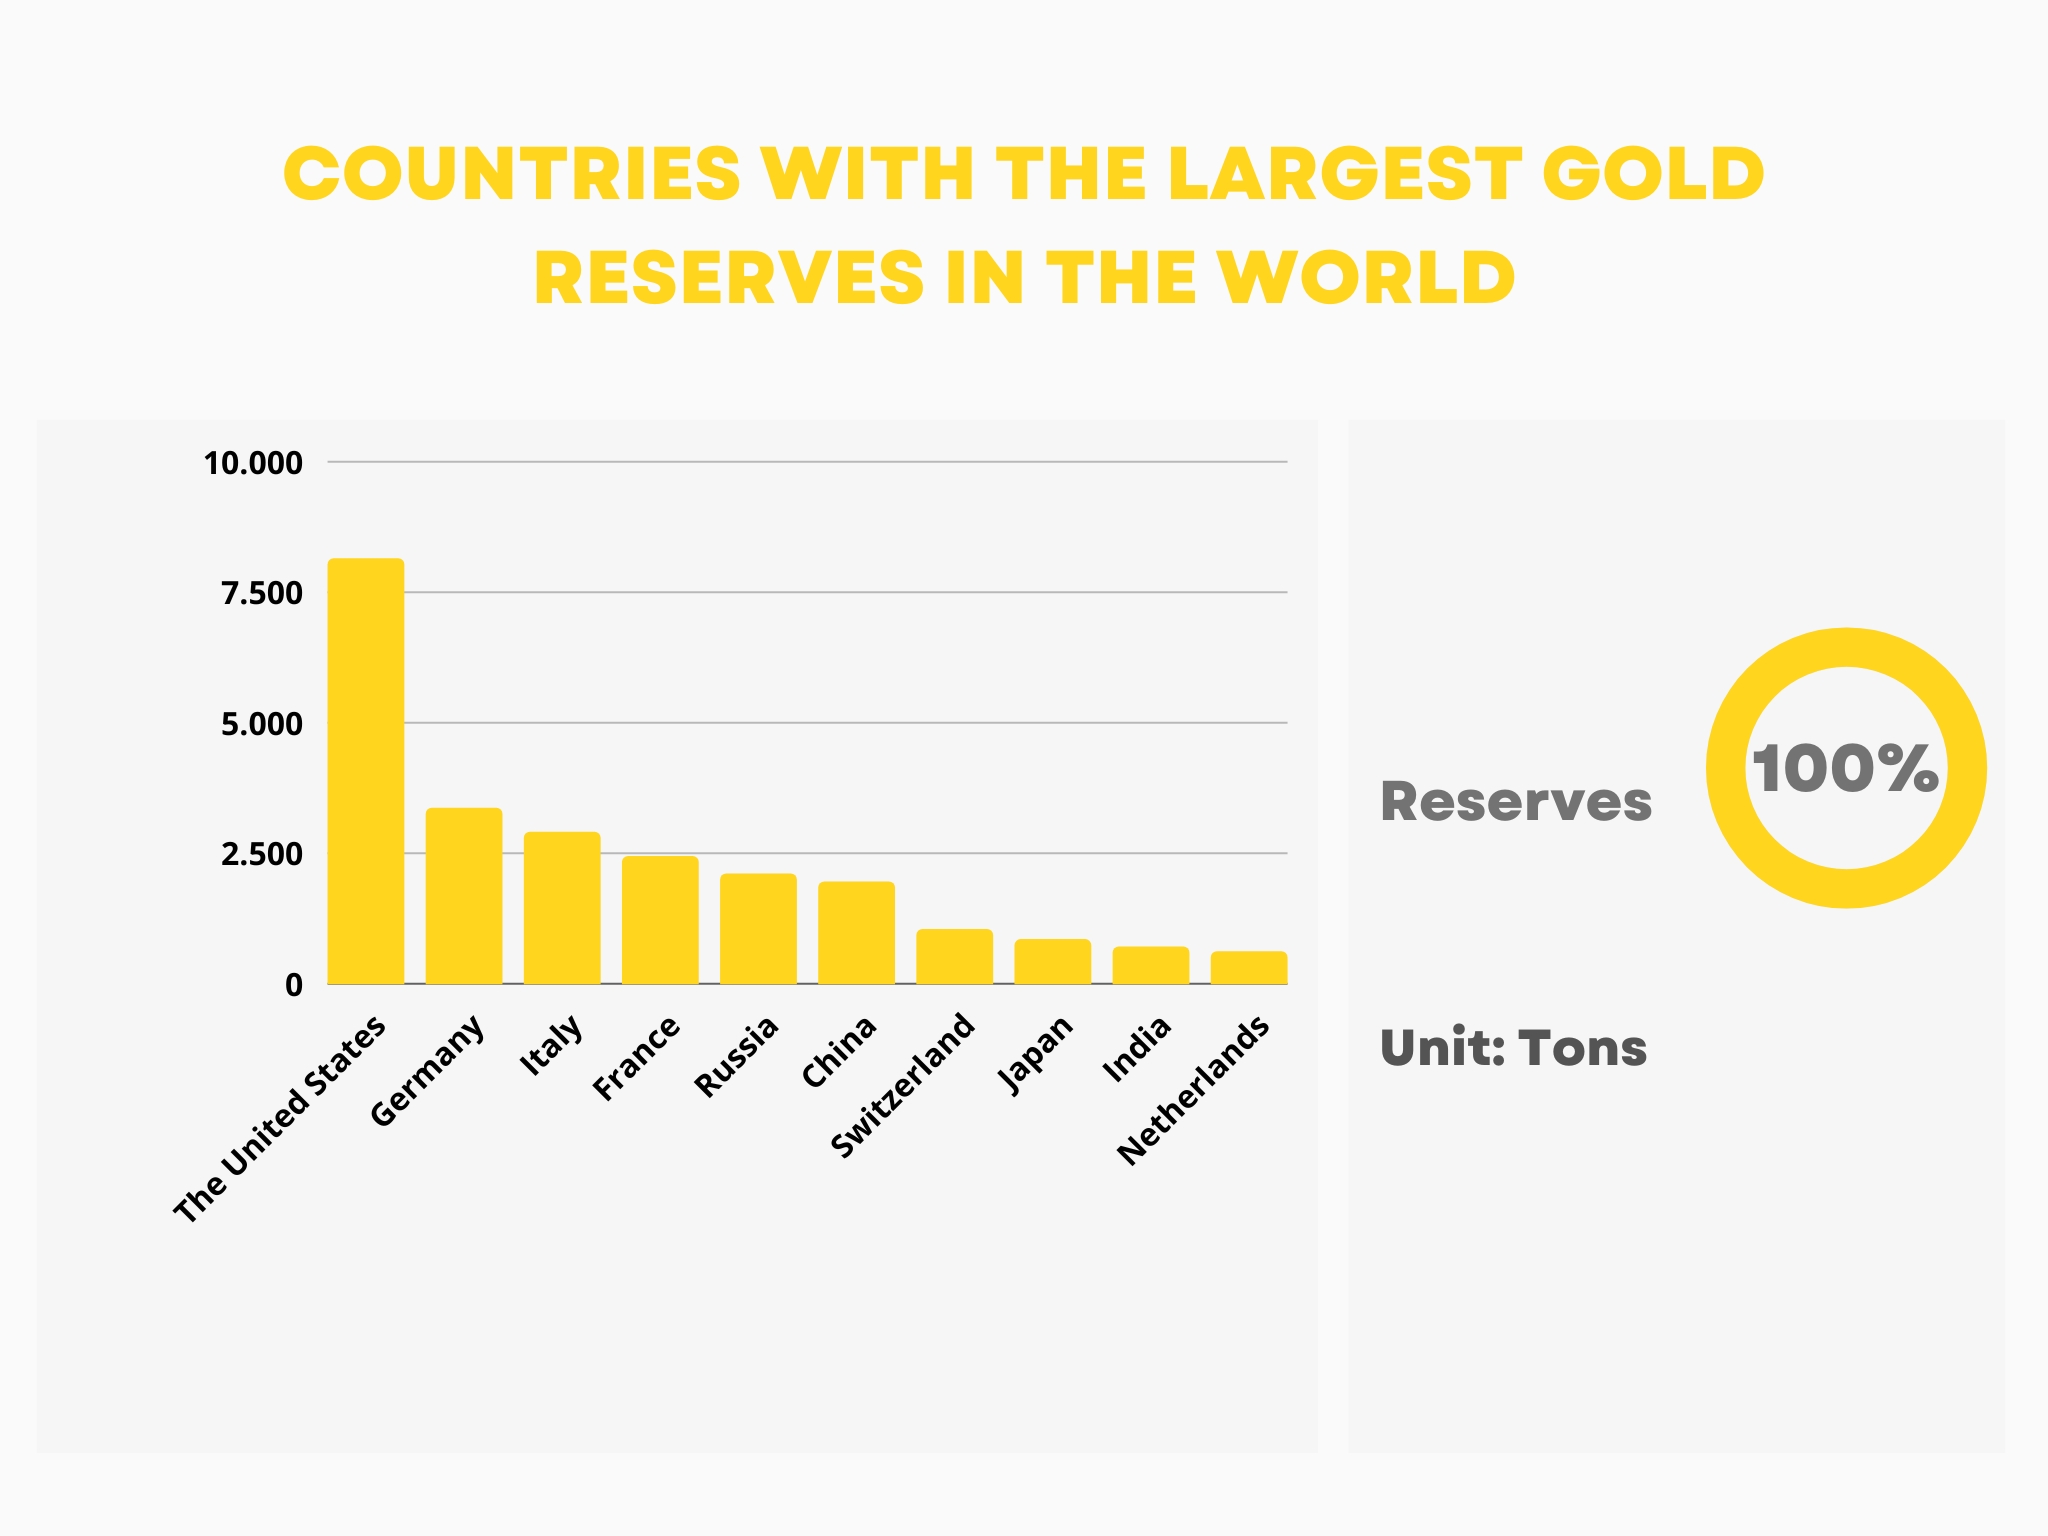 Countries with the Largest Gold Reserves in the World